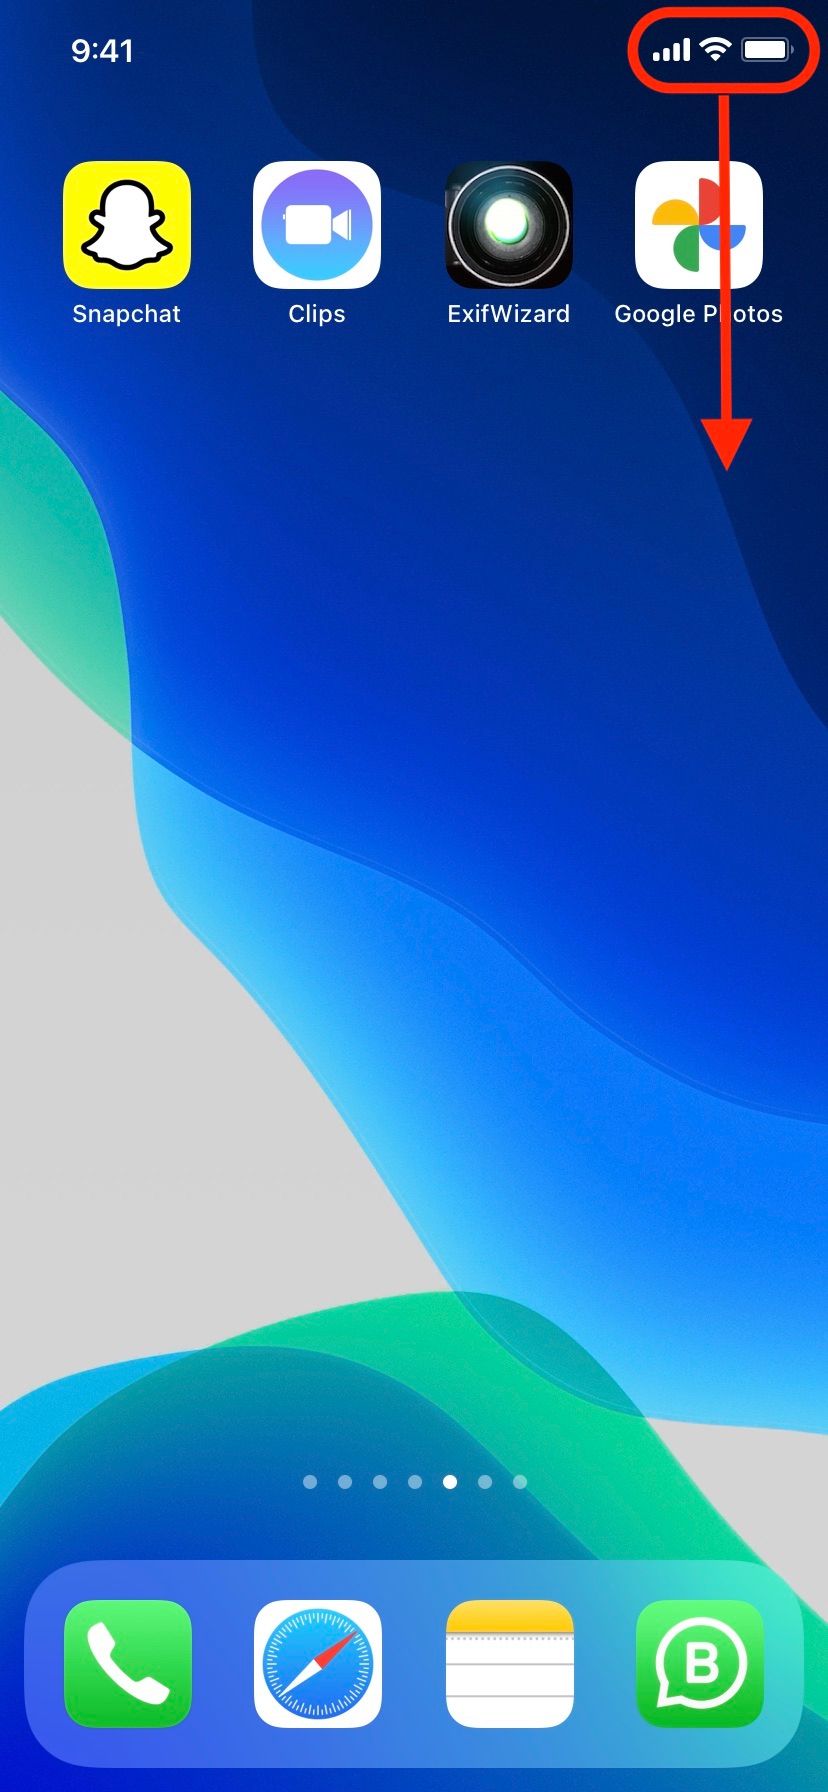 Swipe down from top right corner on iPhone with Face ID